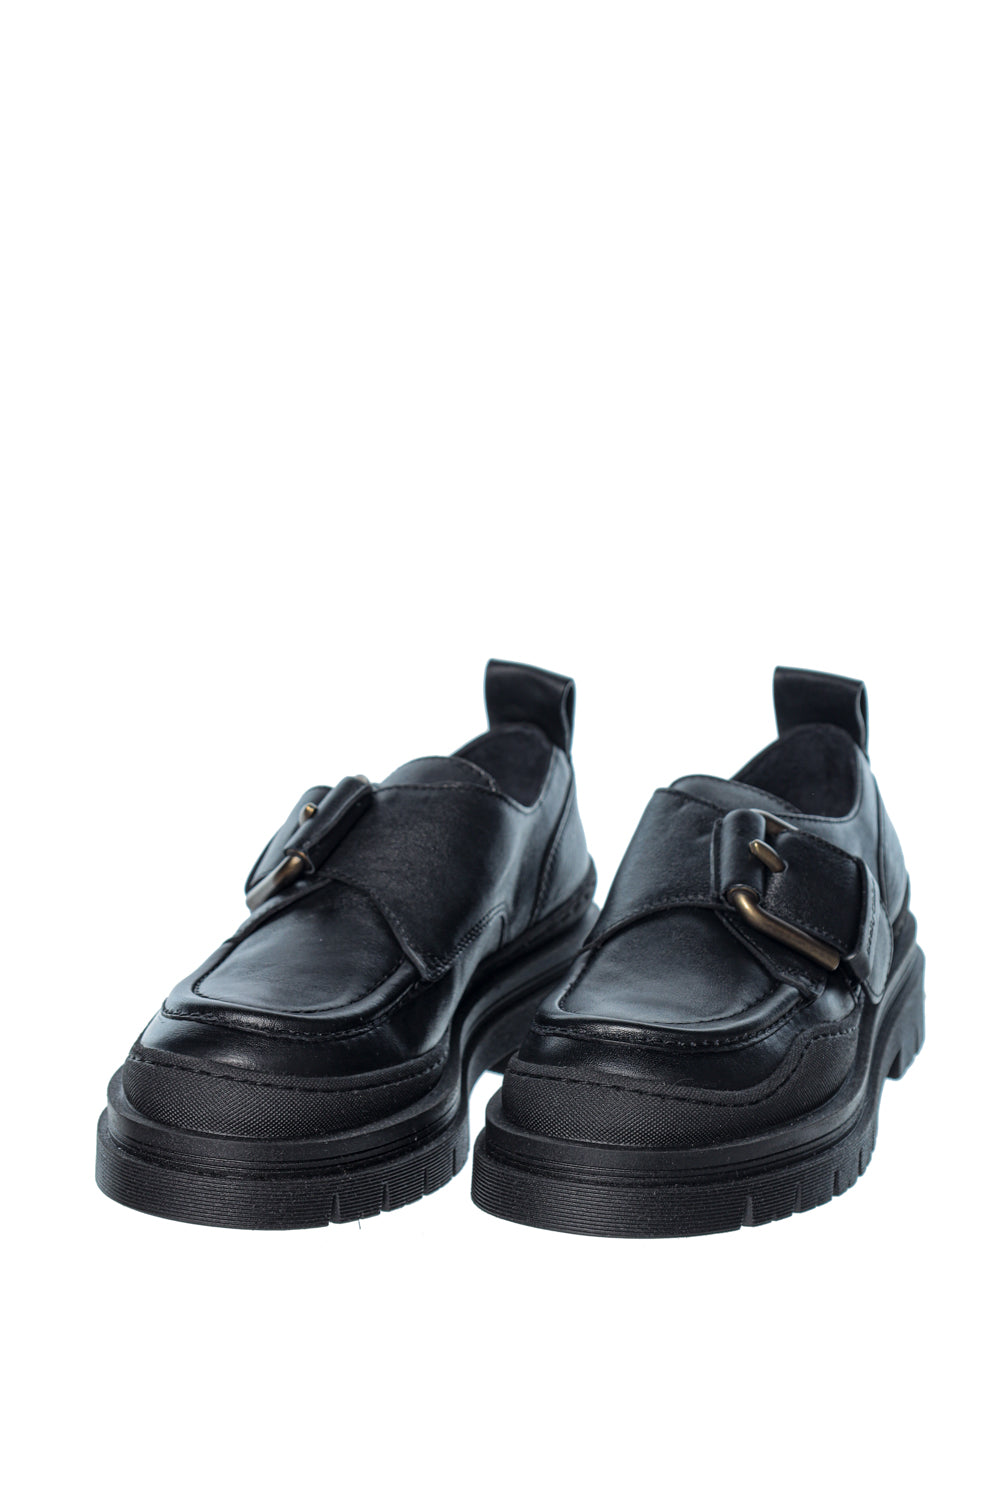 Loafer See by Chloe Calf Willow Monk